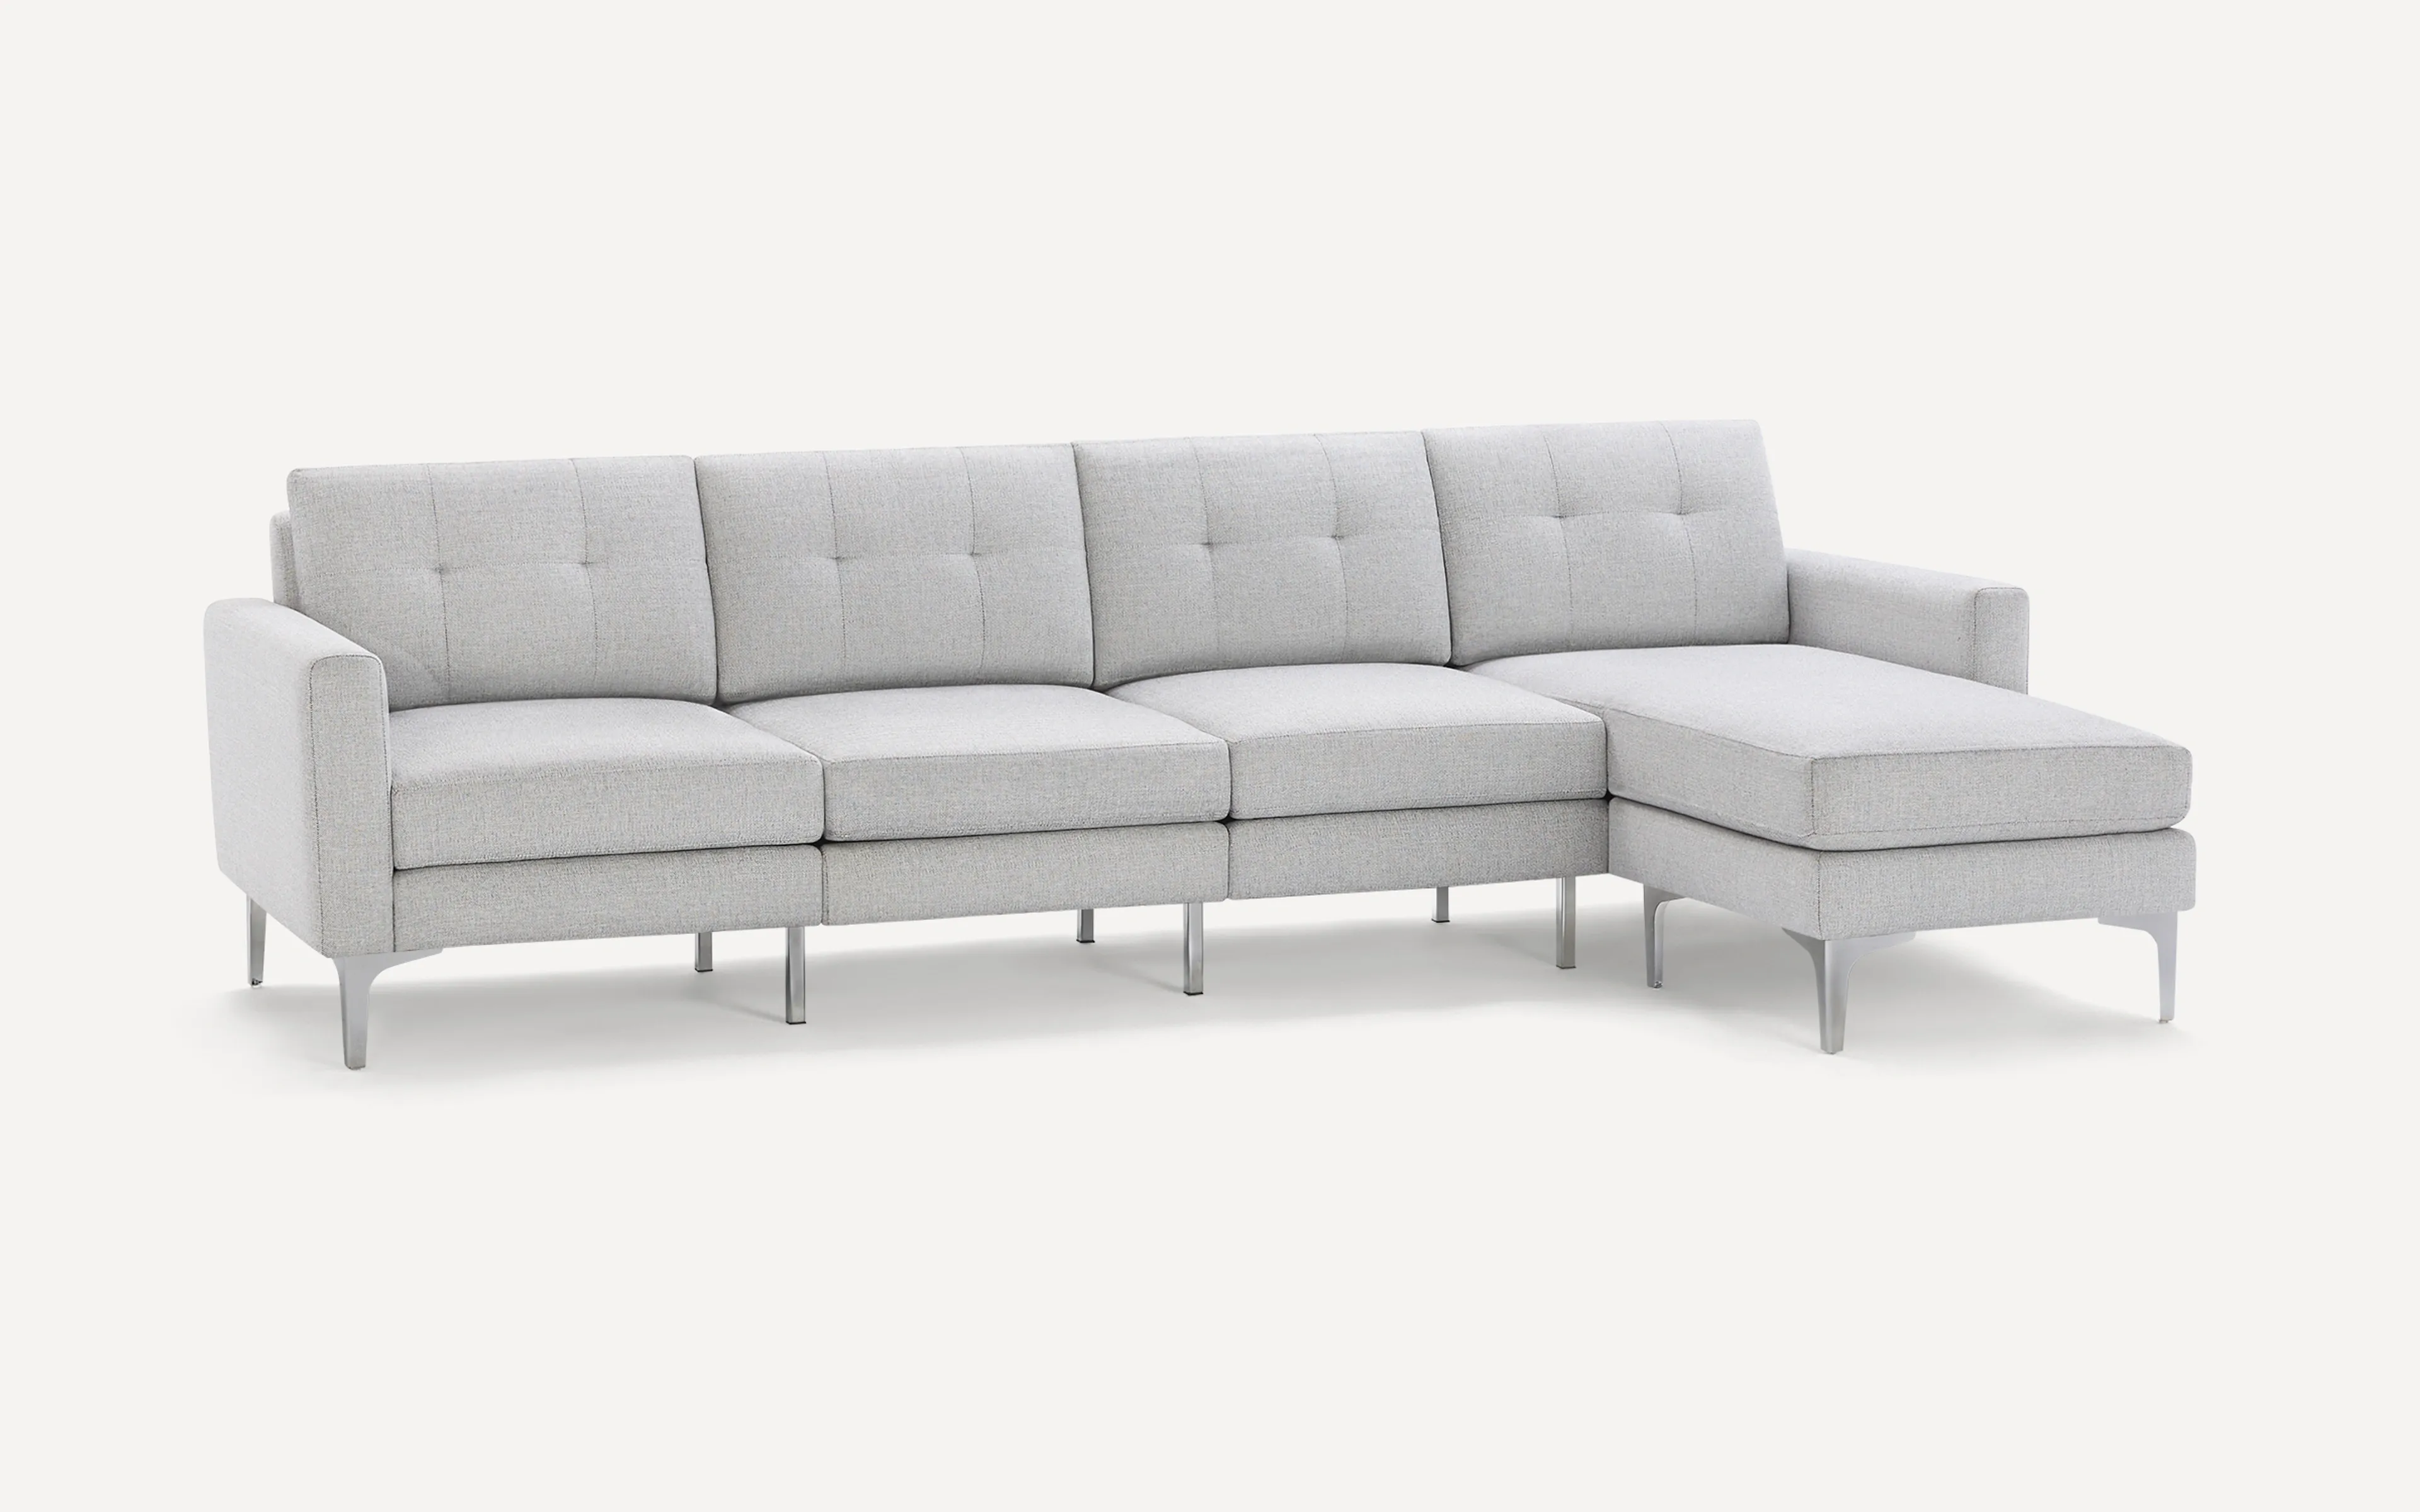 Original Nomad Chaise King Sofa in Crushed Gravel Fabric